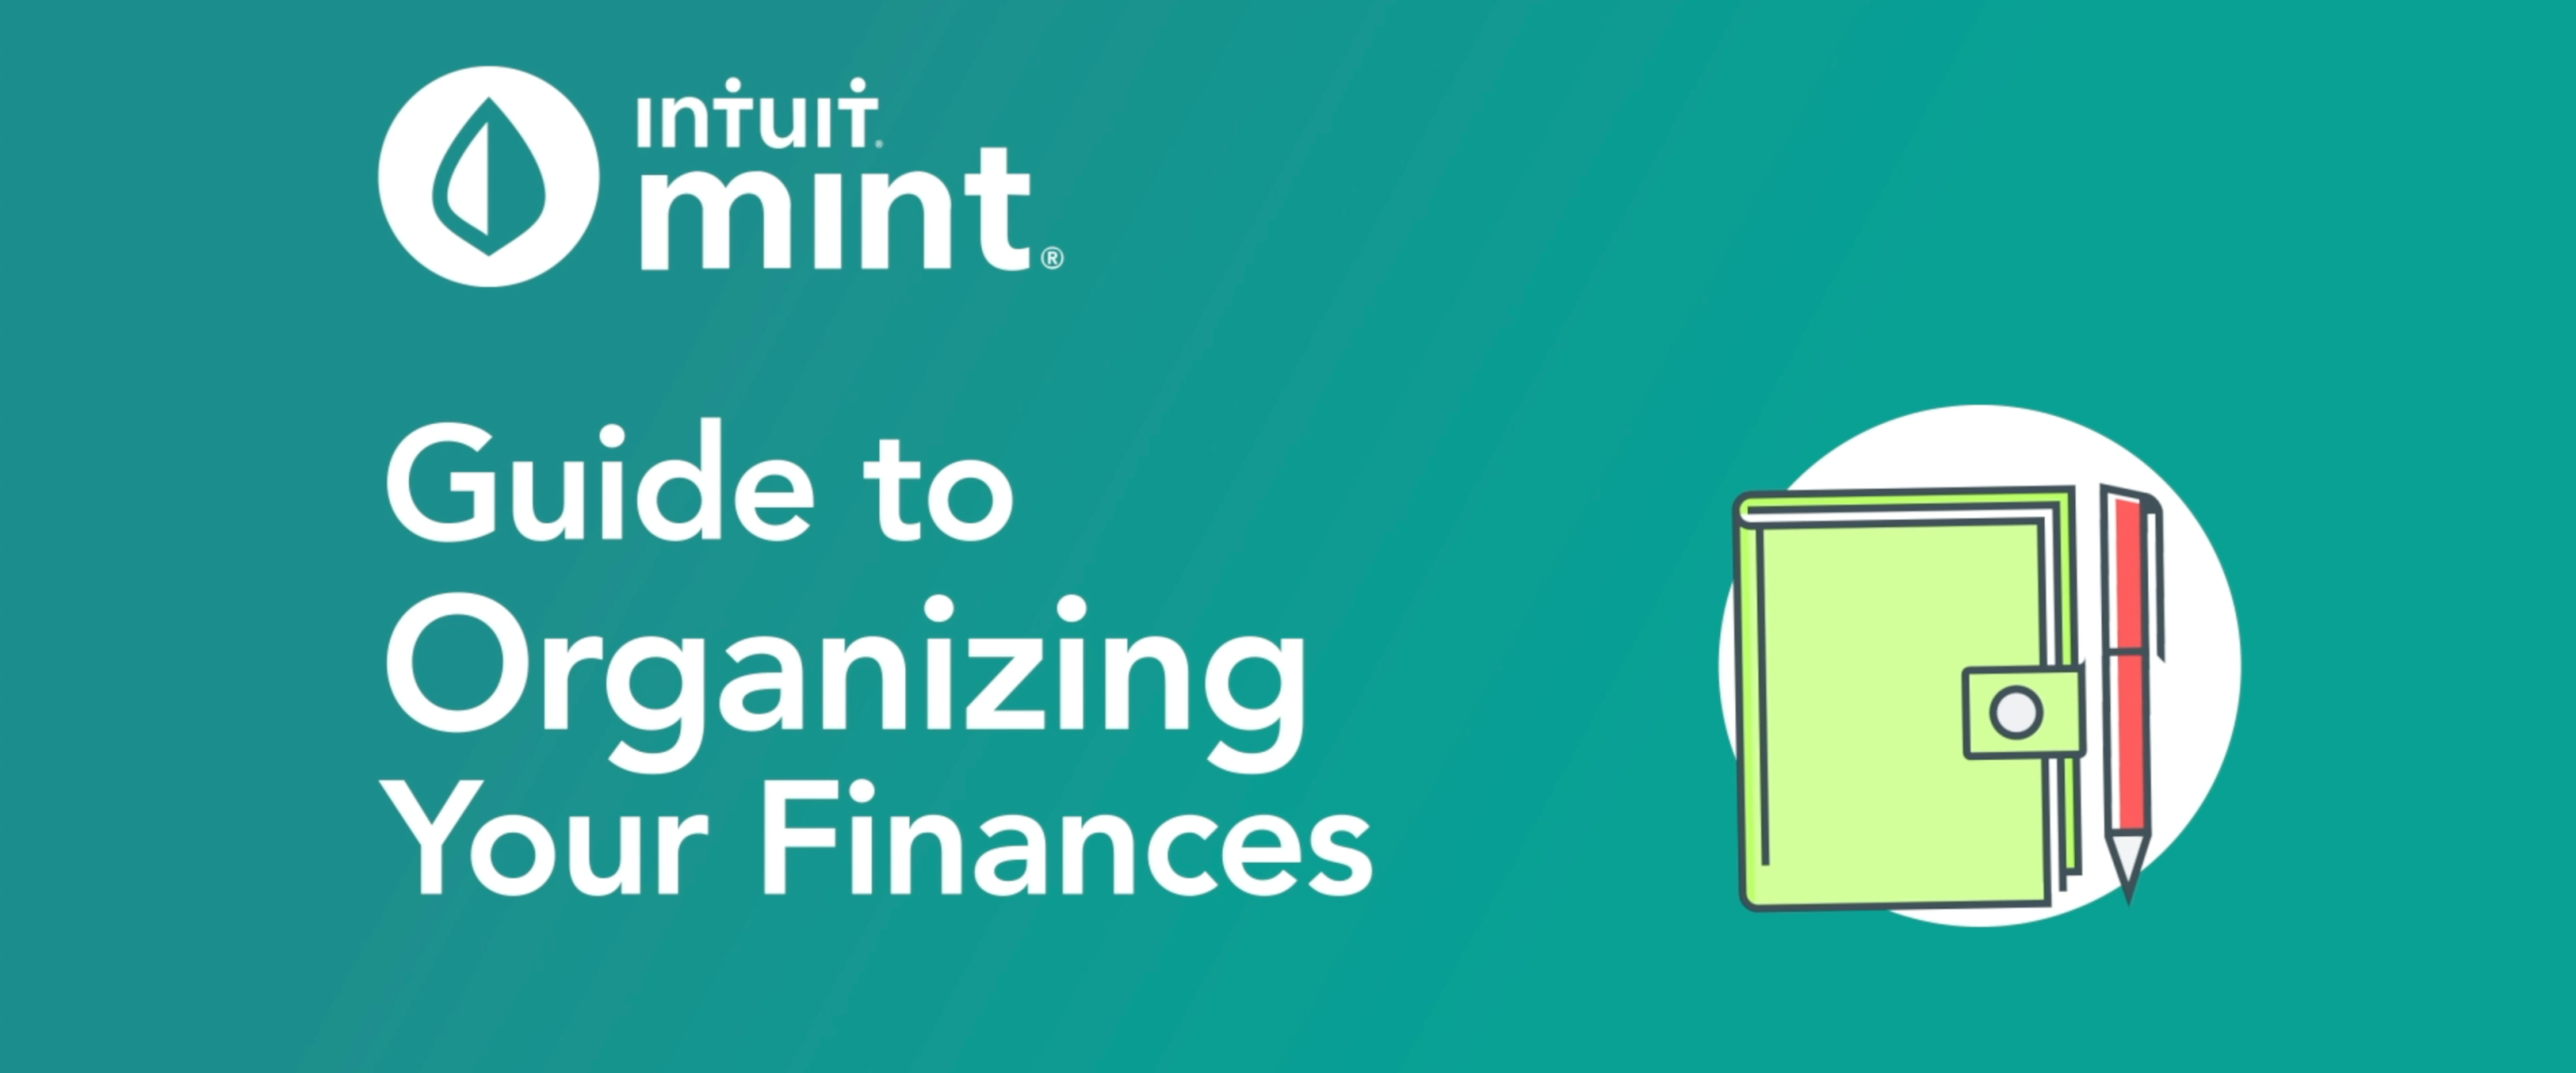 Text: Guide to Organizing Your Finances